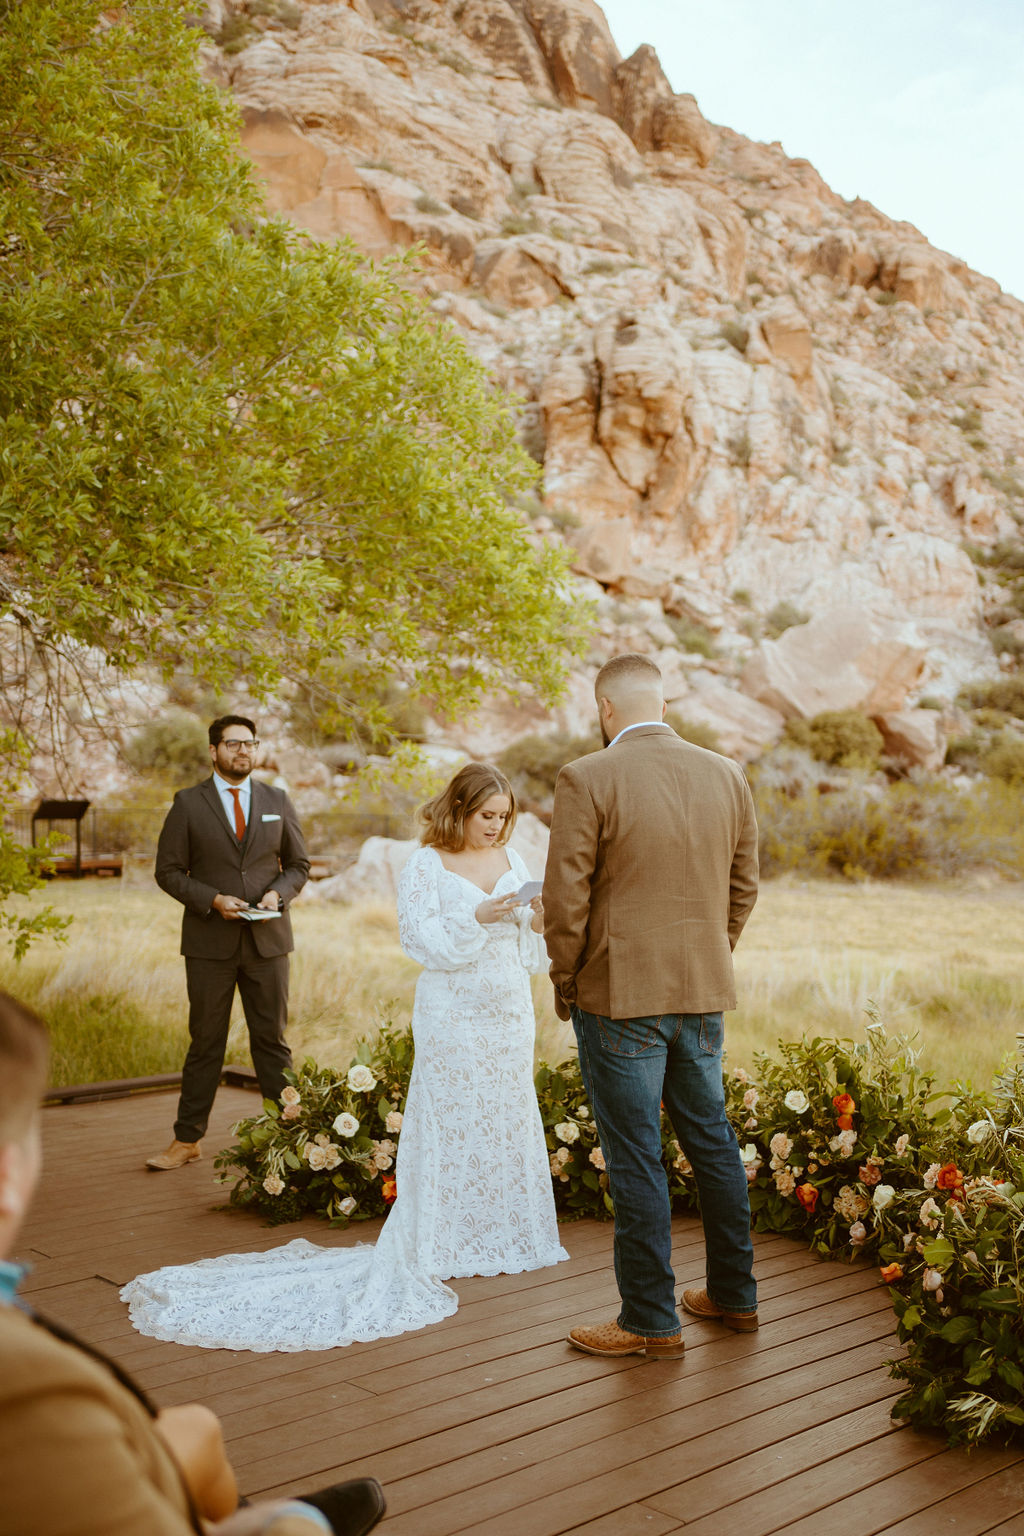 The Bride reads her vows to the groom. Her fitted white lace dress and small train cascades around her. The rustic floral ground arch encircles the bride and groom. The groom is facing the bride in his brown suit jacket with dark blue jeans. 